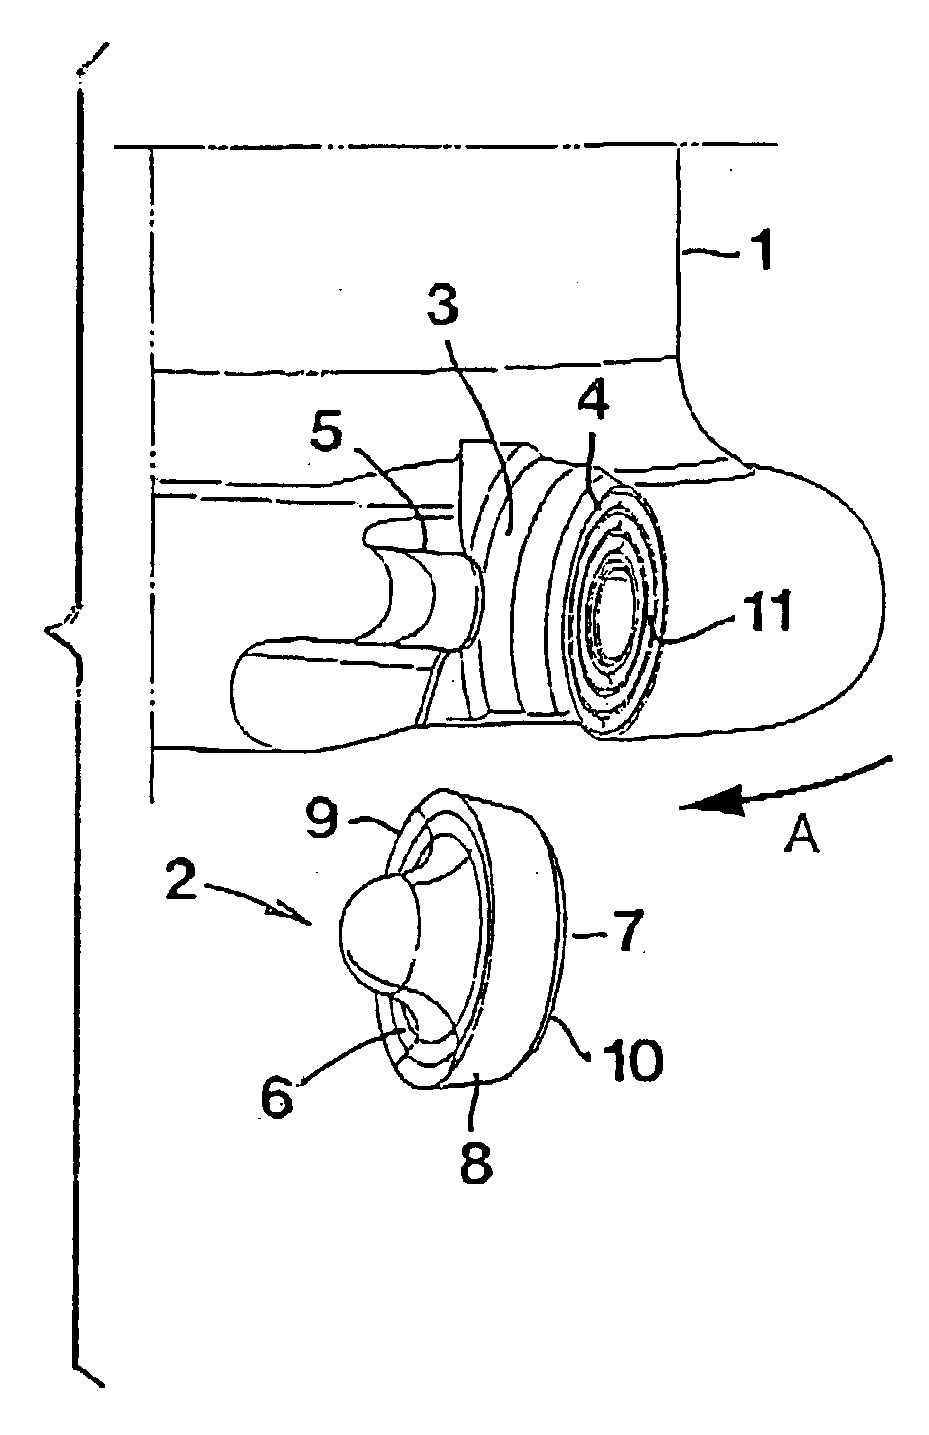 Tool for chip removing machining and rotatable cutting insert for such tools